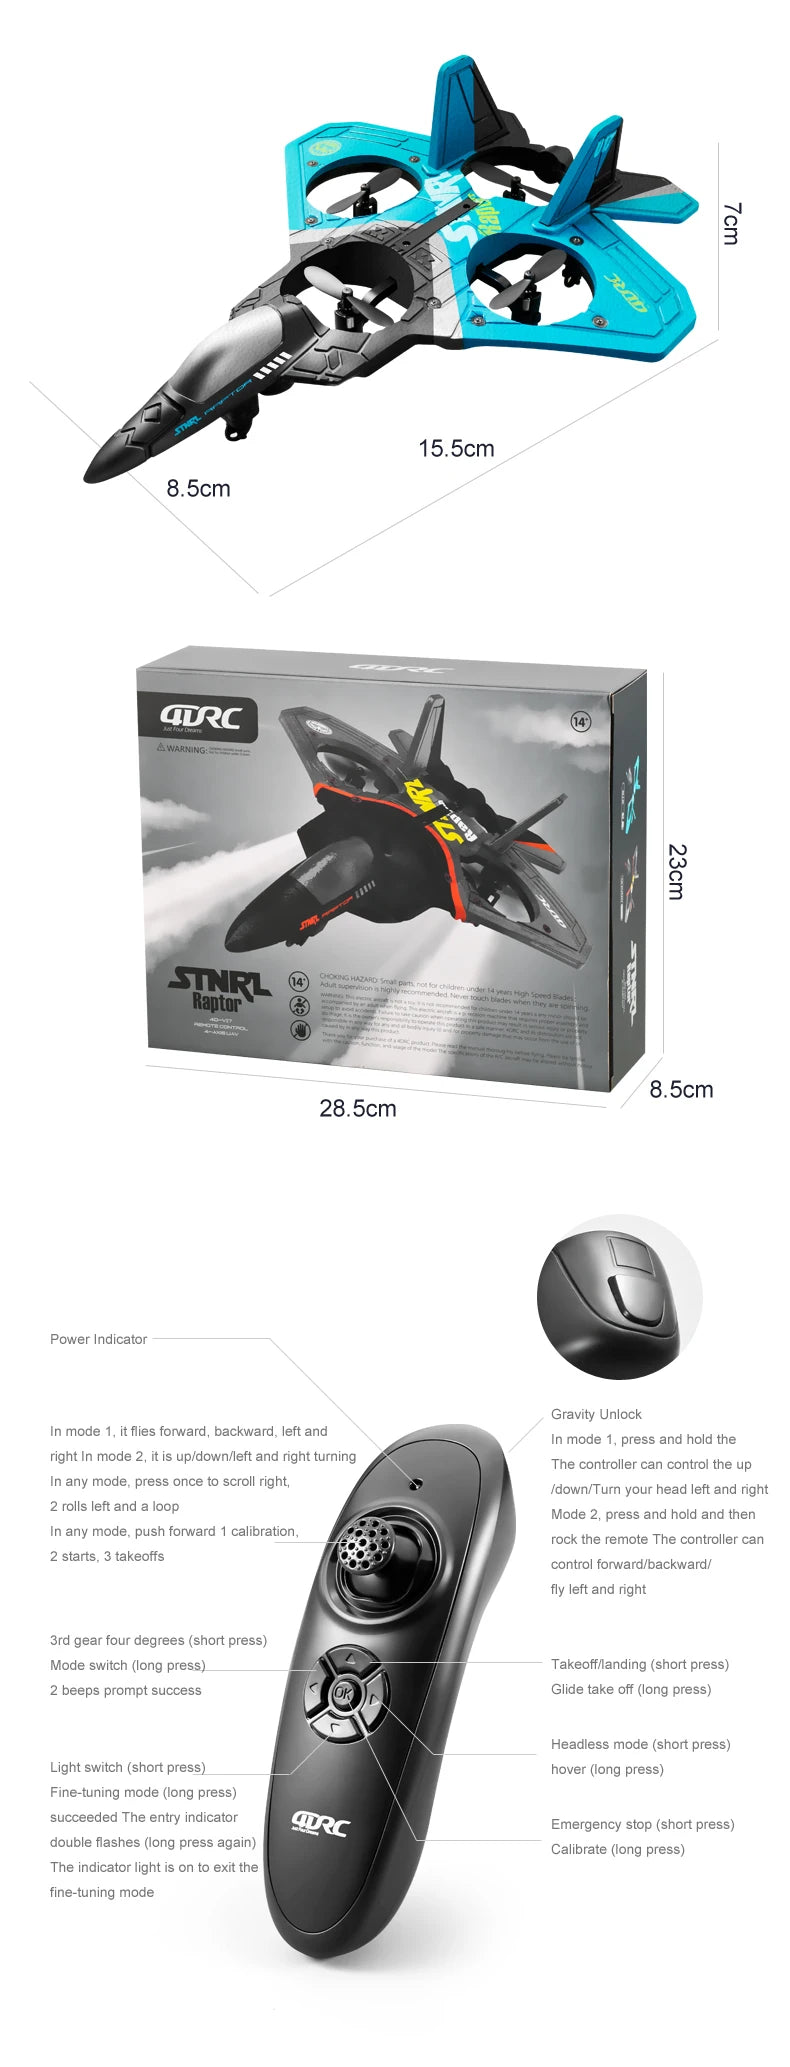 V17 RC Remote Control Airplane, 3 15.5cm 28.5cm Power Indicator Gravity Unlock In mode